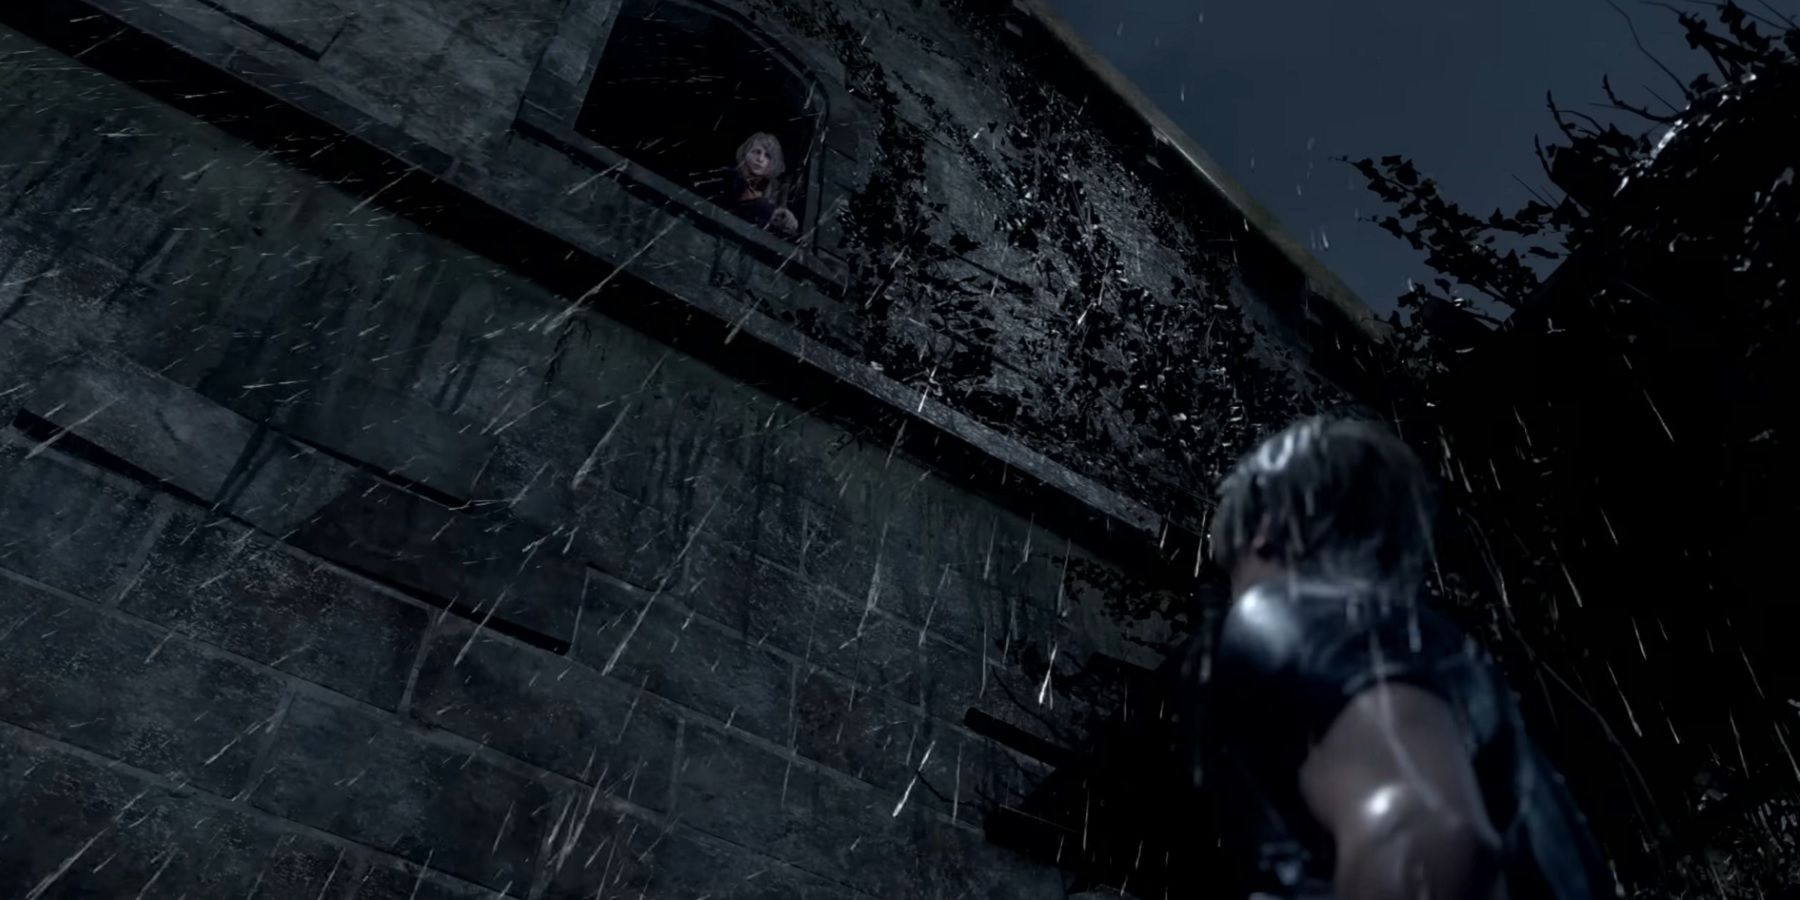 Image from the Resident Evil 4 Remake showing Ashley about to jump out of the window.